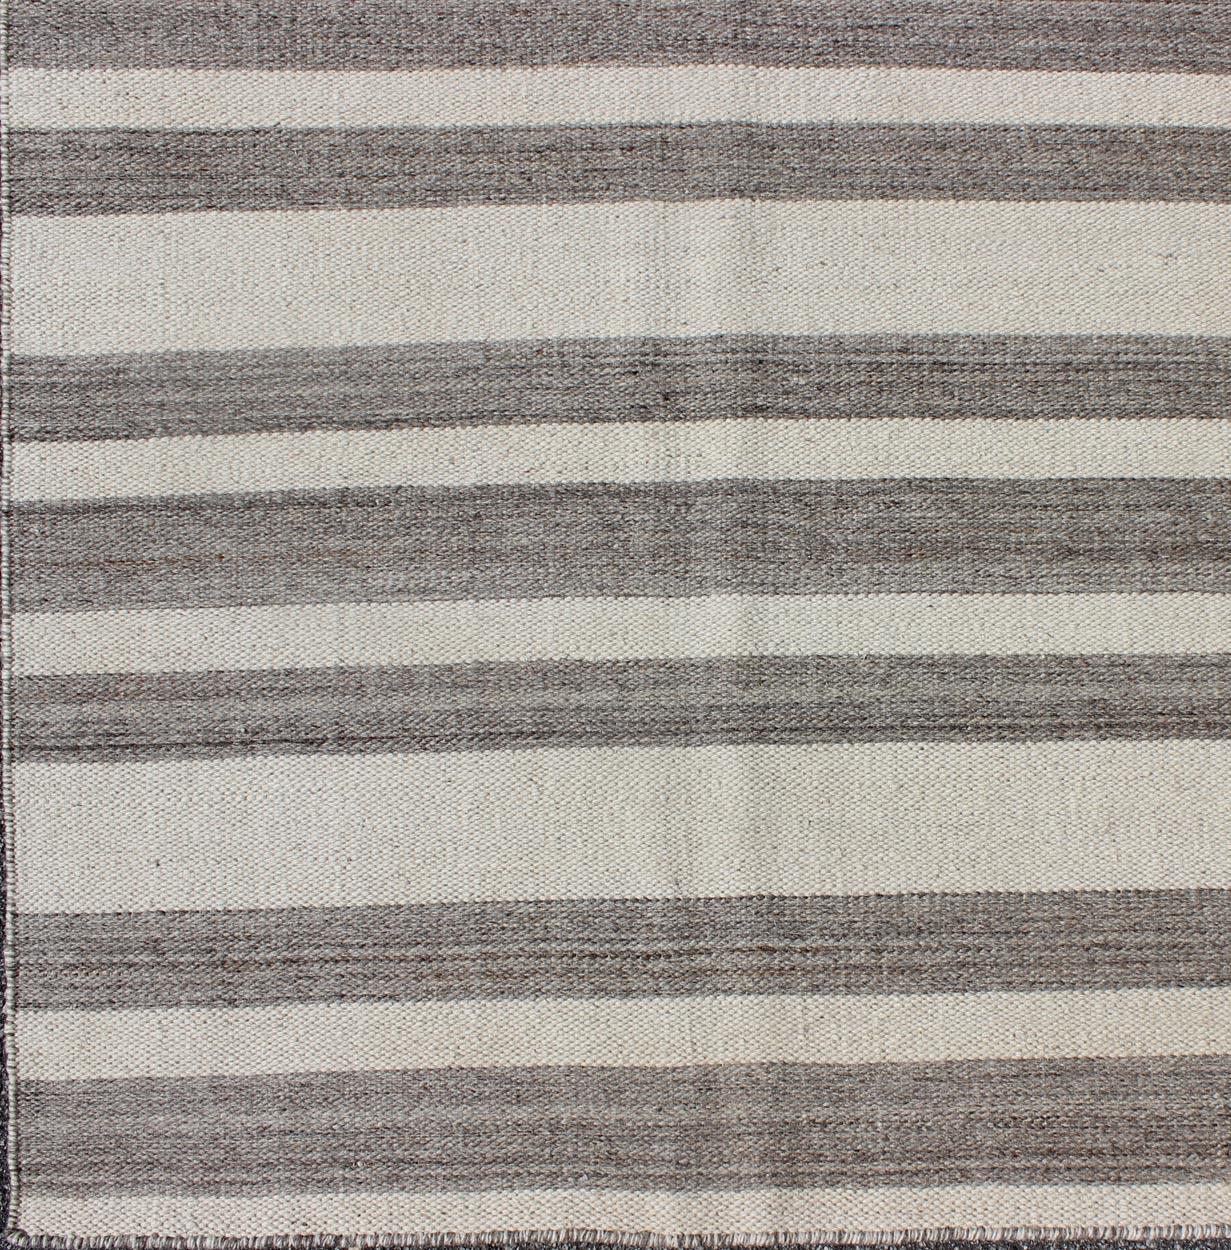 Casual flat-weave Kilim rug with gray and cream in Classic Stripe design, rug BDH-113556 country of origin / type: Afghanistan / Kilim

This vibrant Kilim rug features a Classic stripe design, perfectly suited for casual and easy interiors, such